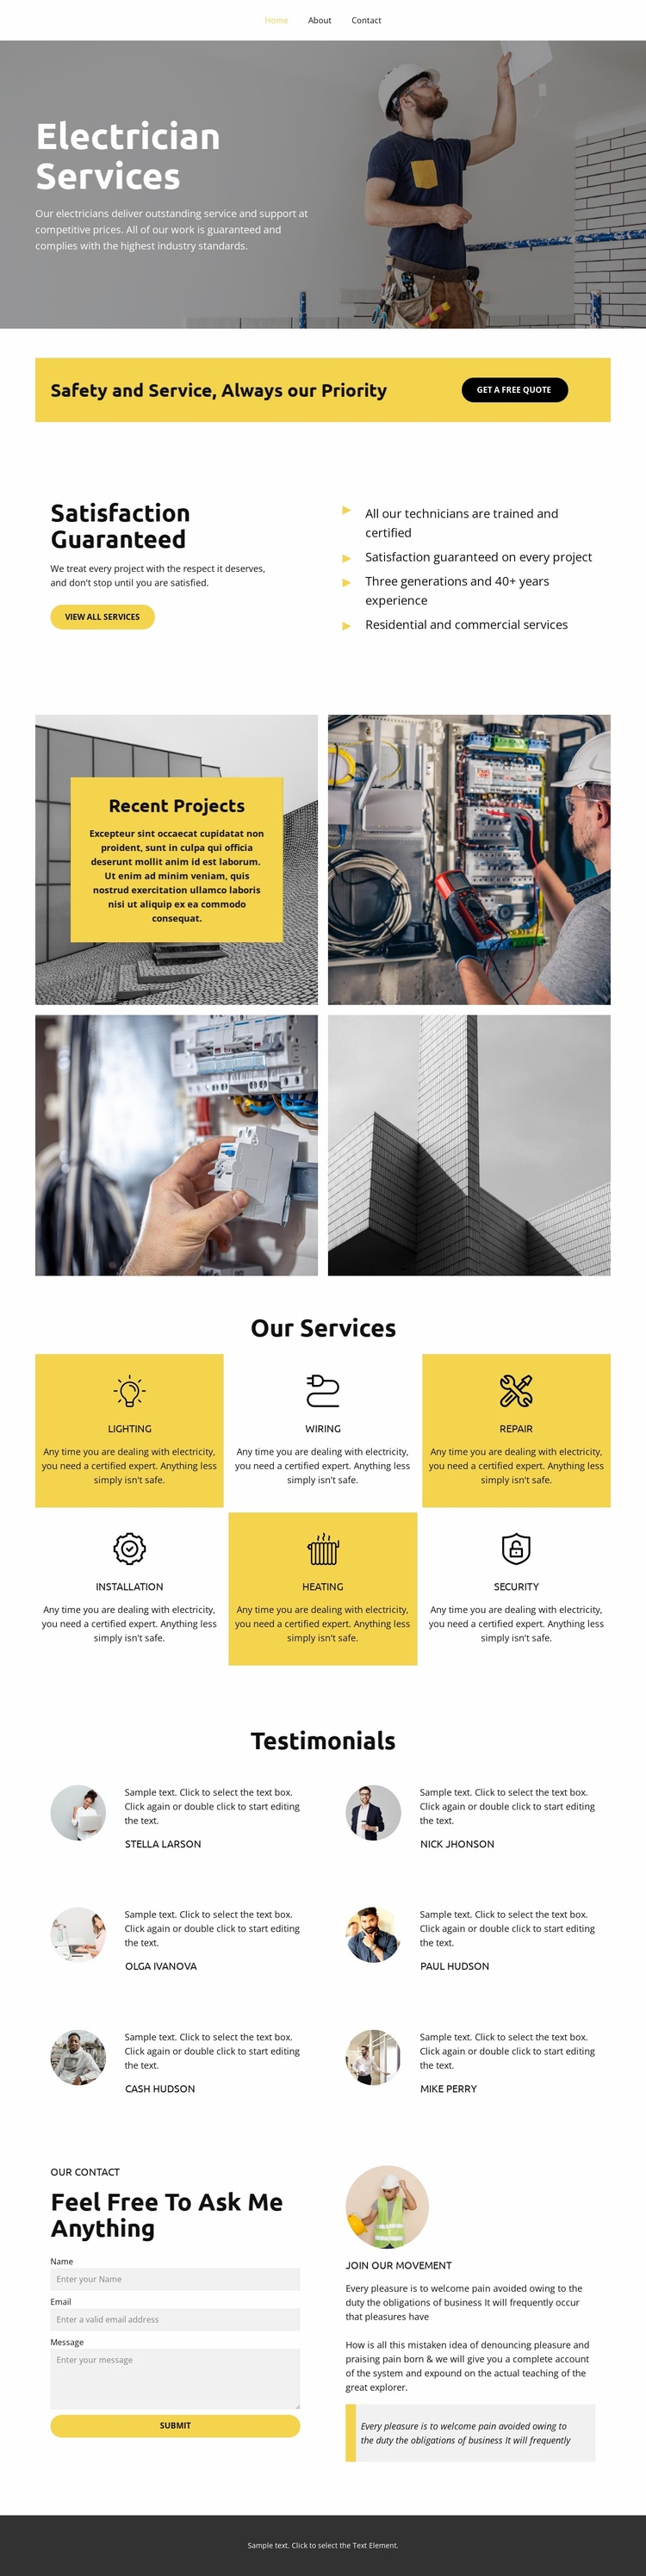 Electrician Services Website Template